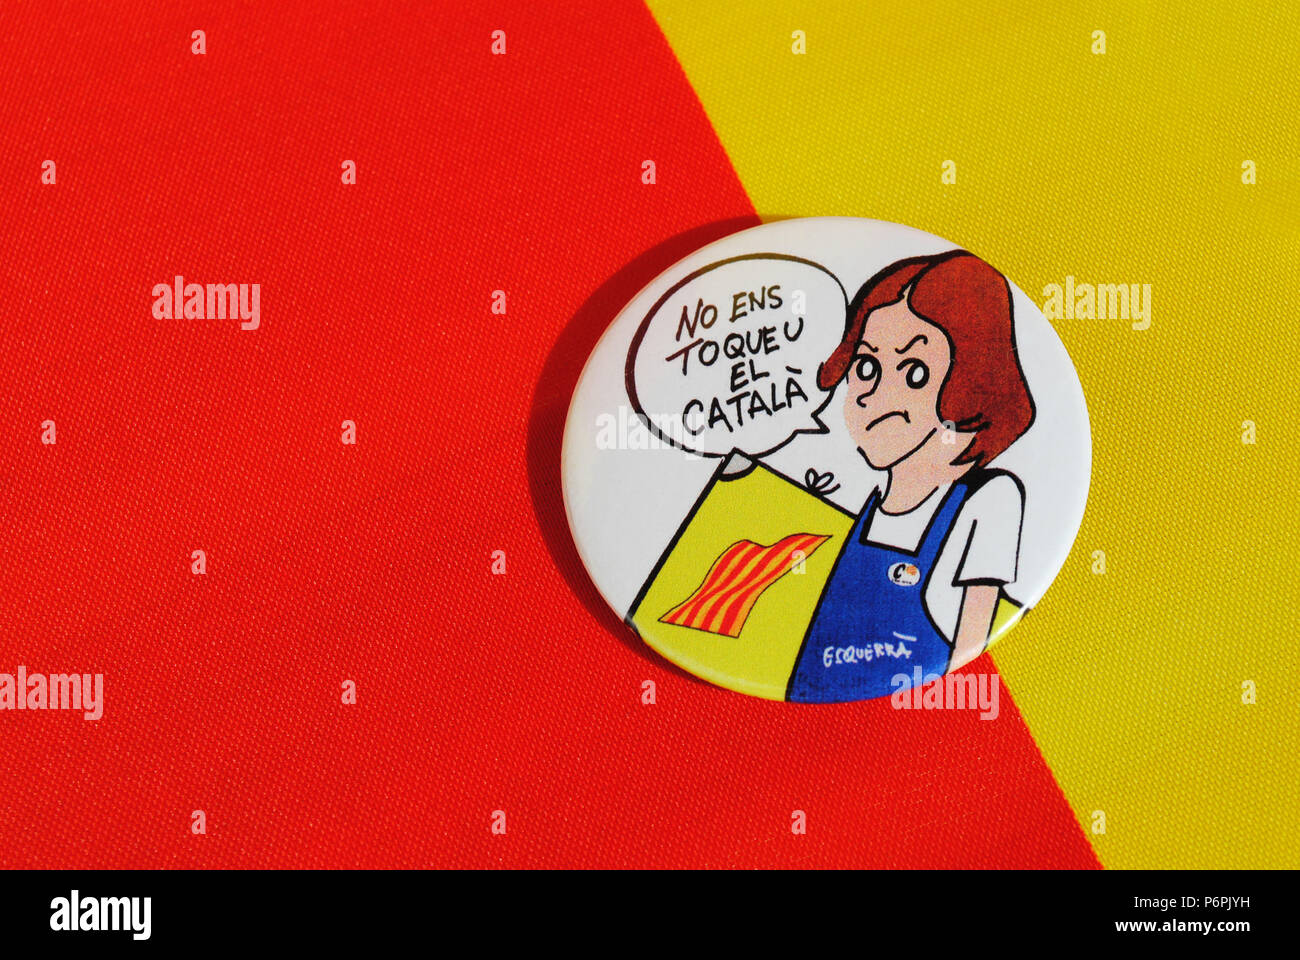 A circular badge on red and yellow background depicting a cartoon female student who disagrees with Spain's planned language system in education. Stock Photo